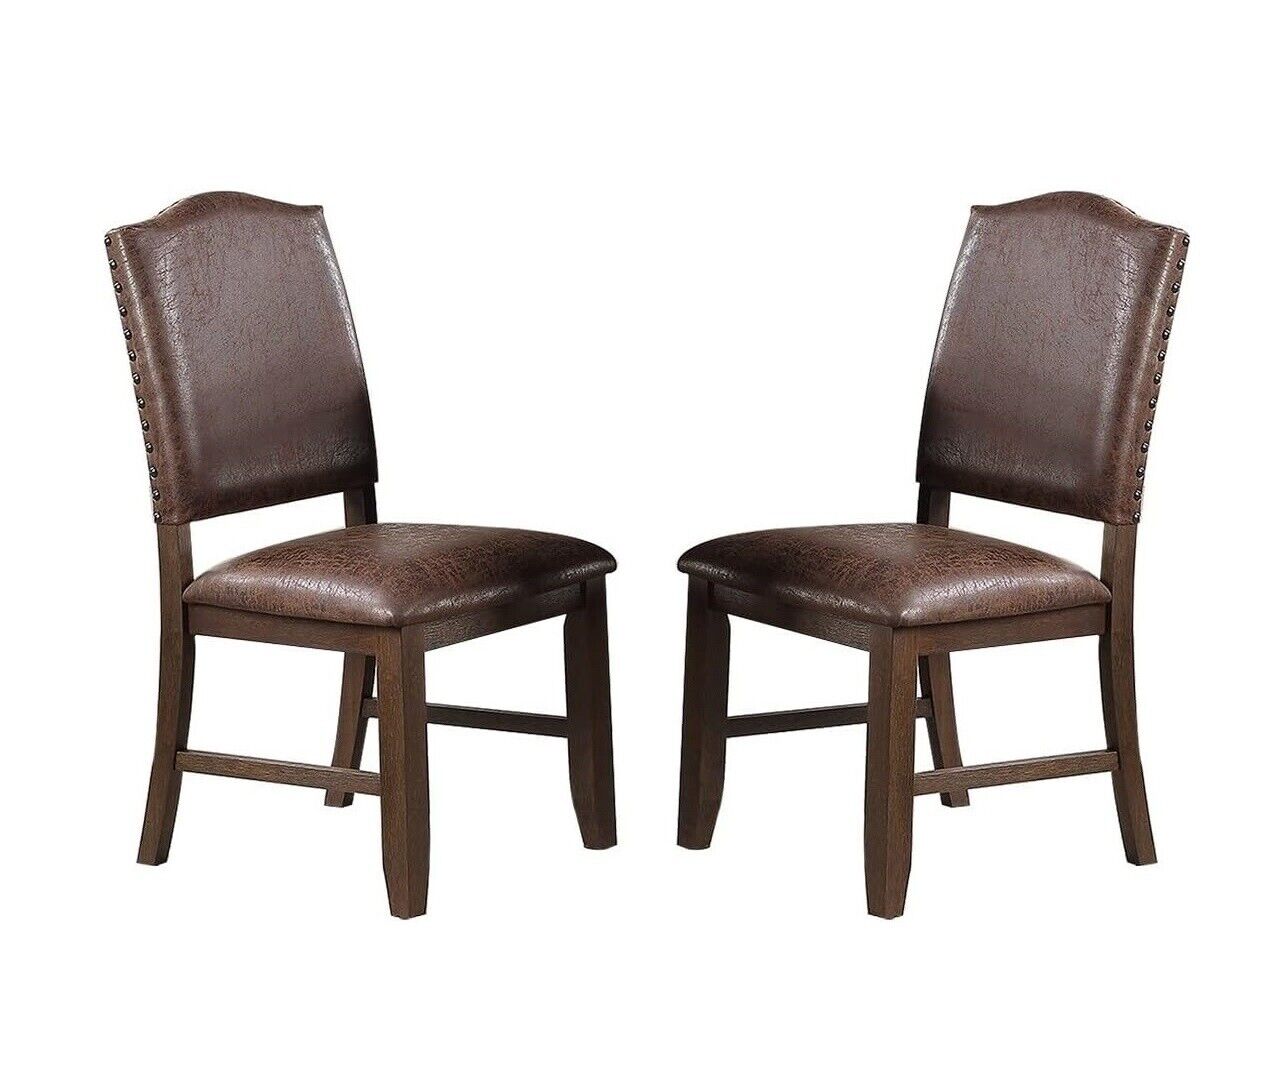 Esofastore Kitchen Dining Room Rustic Espresso Faux Leather 6pcs Dining Chairs Upholstered Cushions Seat Back